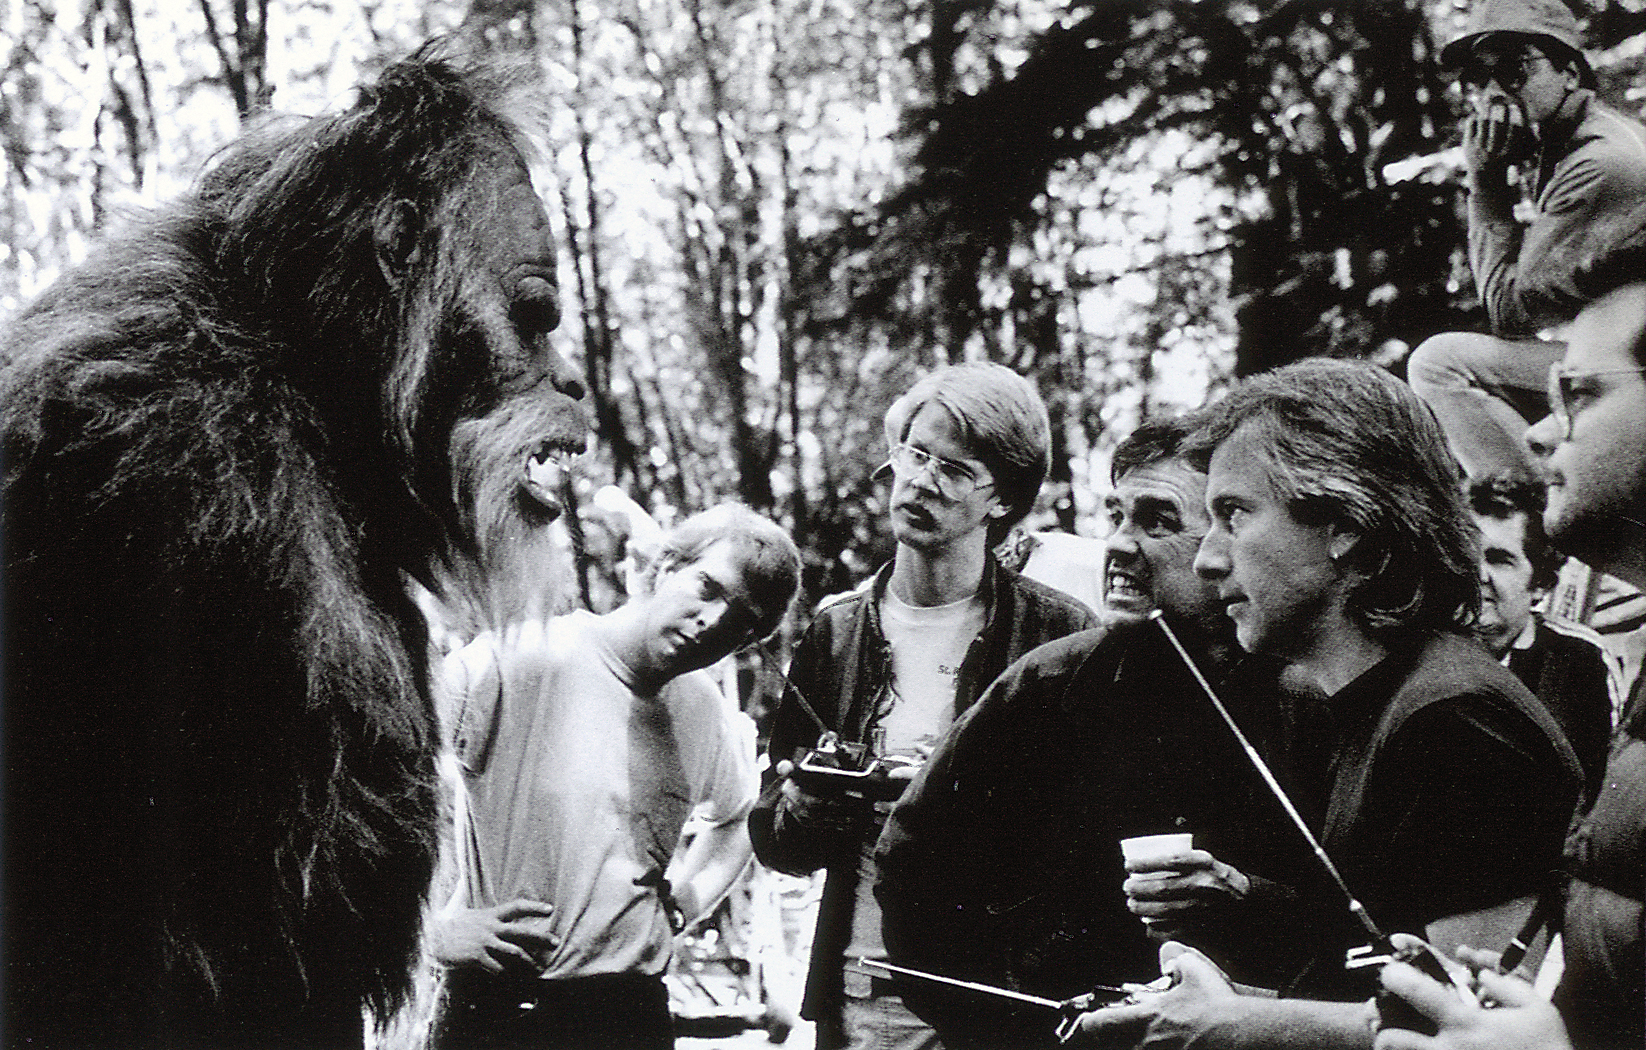 Harry & the Hendersons (1987) Seattle location. 'Index' mountain top. Kevin Peter Hall, Marc Tyler, Tom Hester, Bill Dear, Rick Baker, Tim Lawrence.